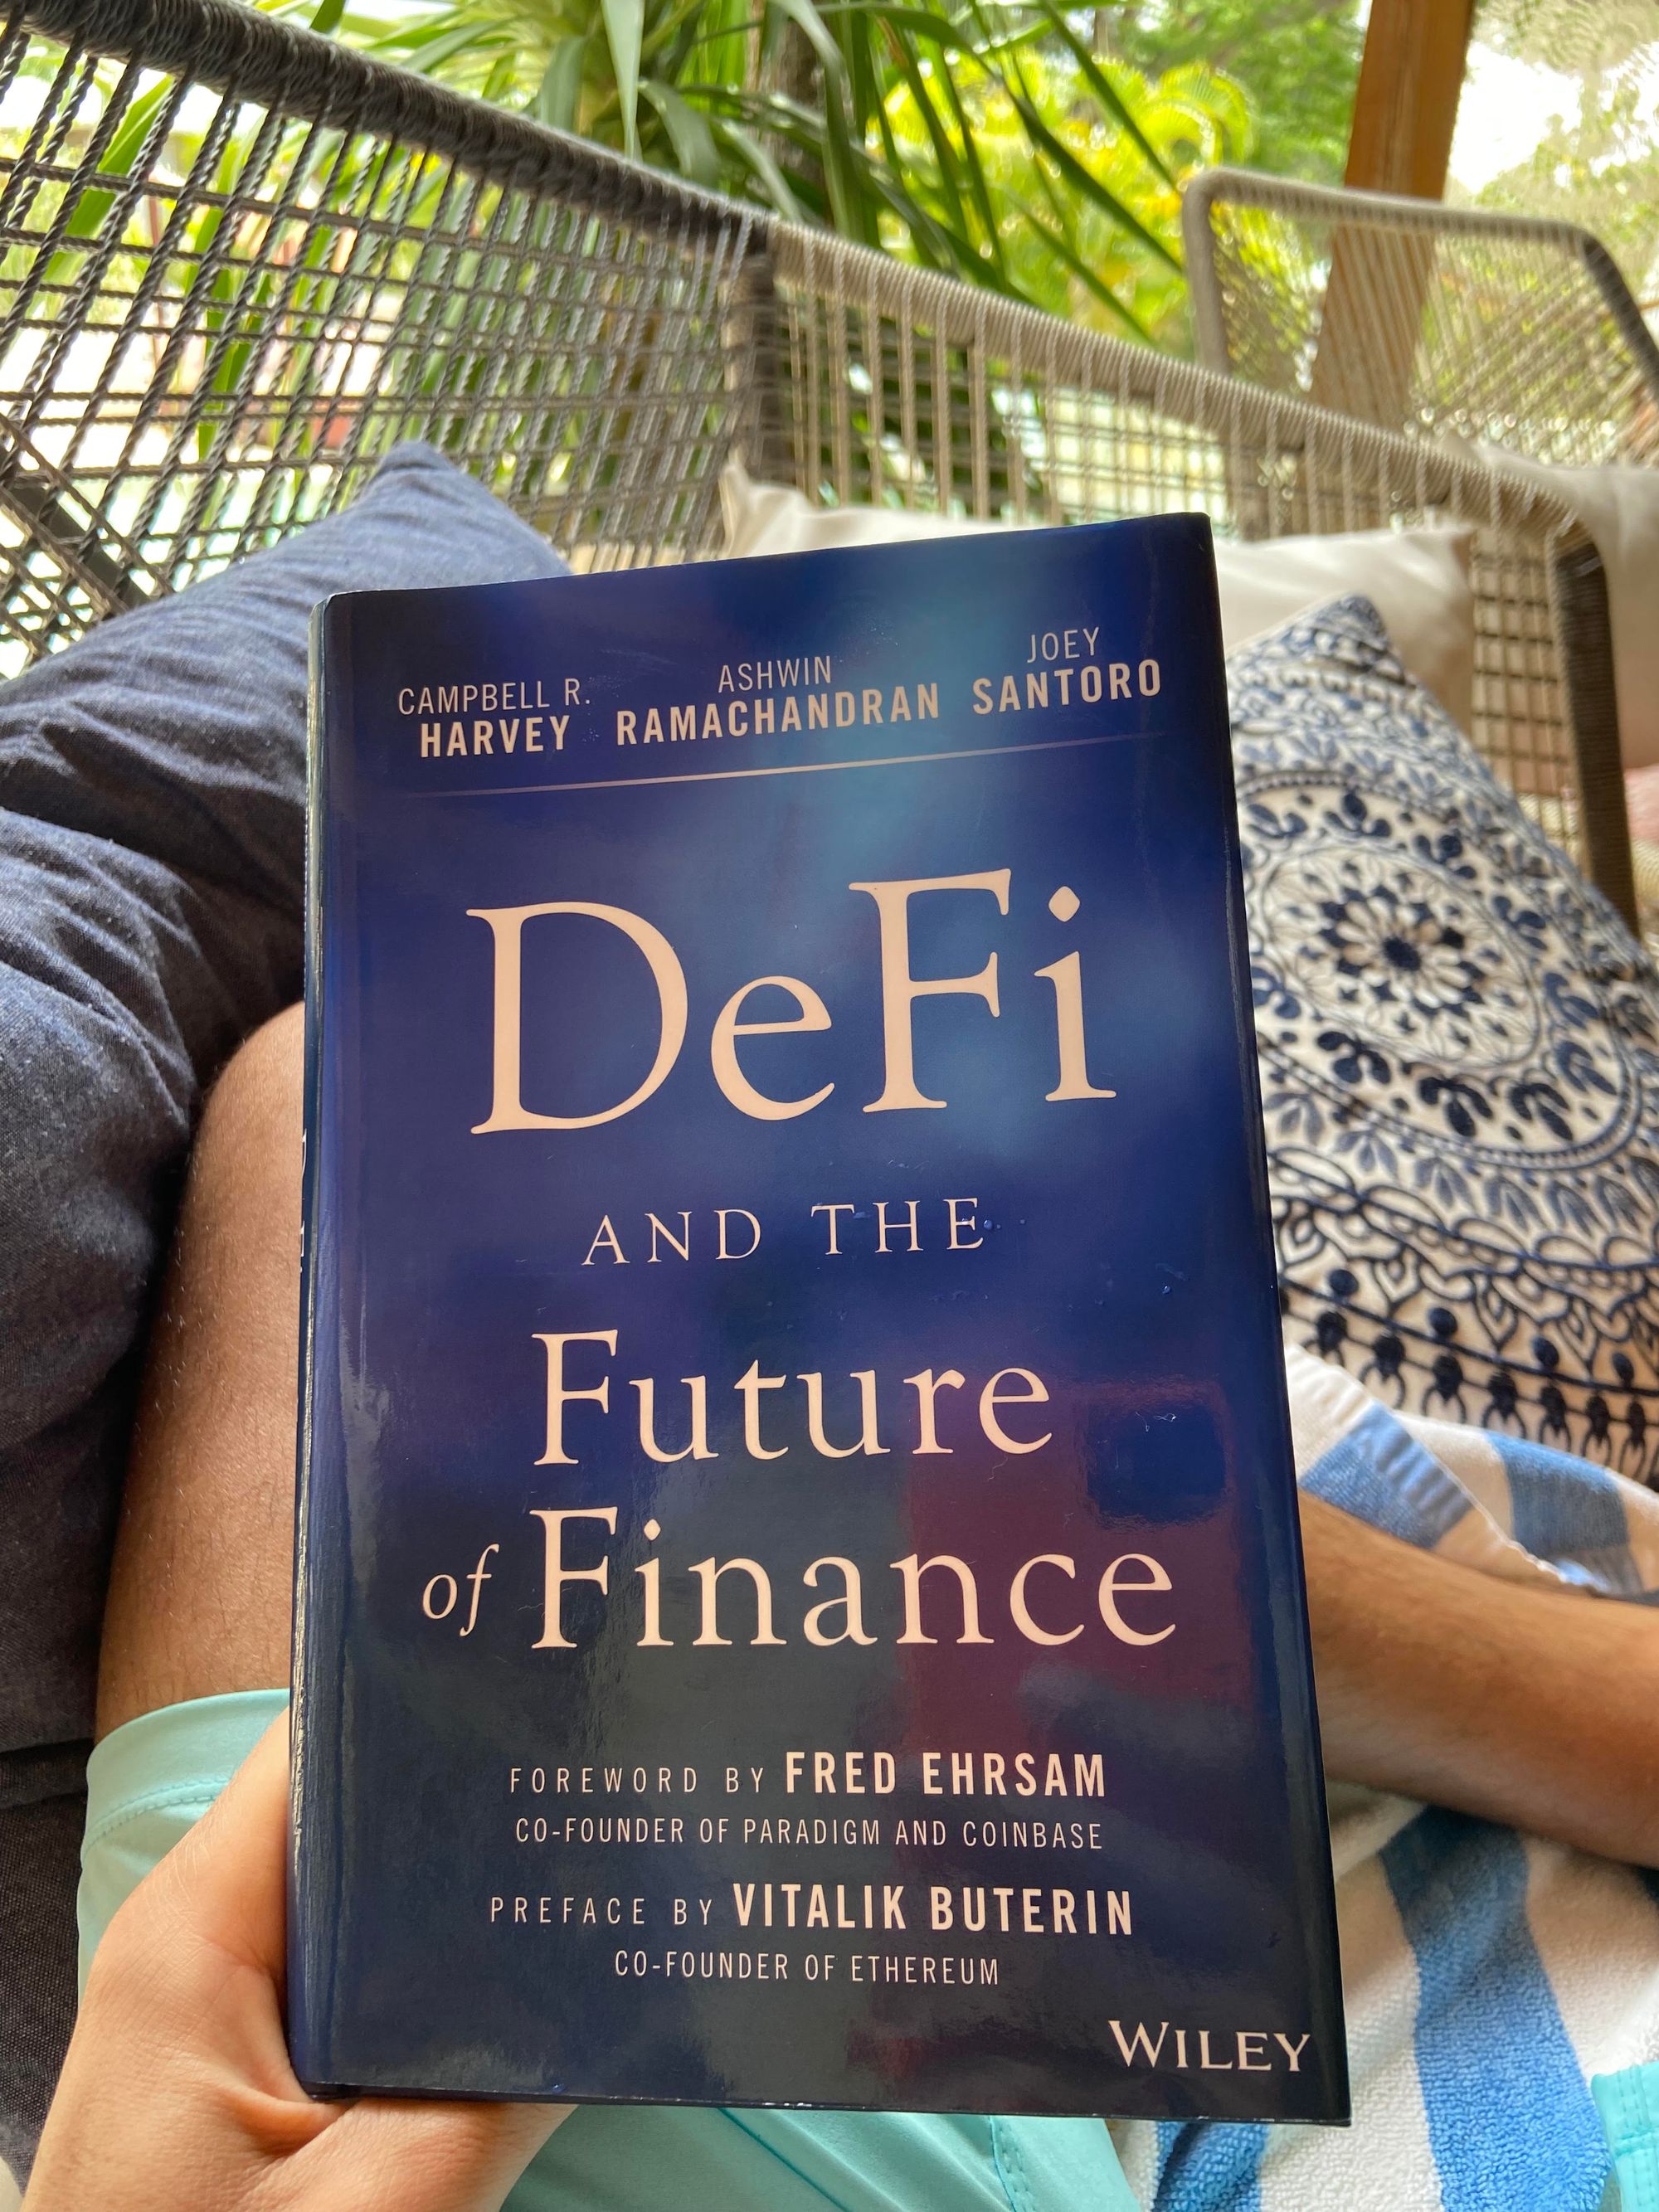 Some summer crypto reading: DeFi and The Infinite Machine